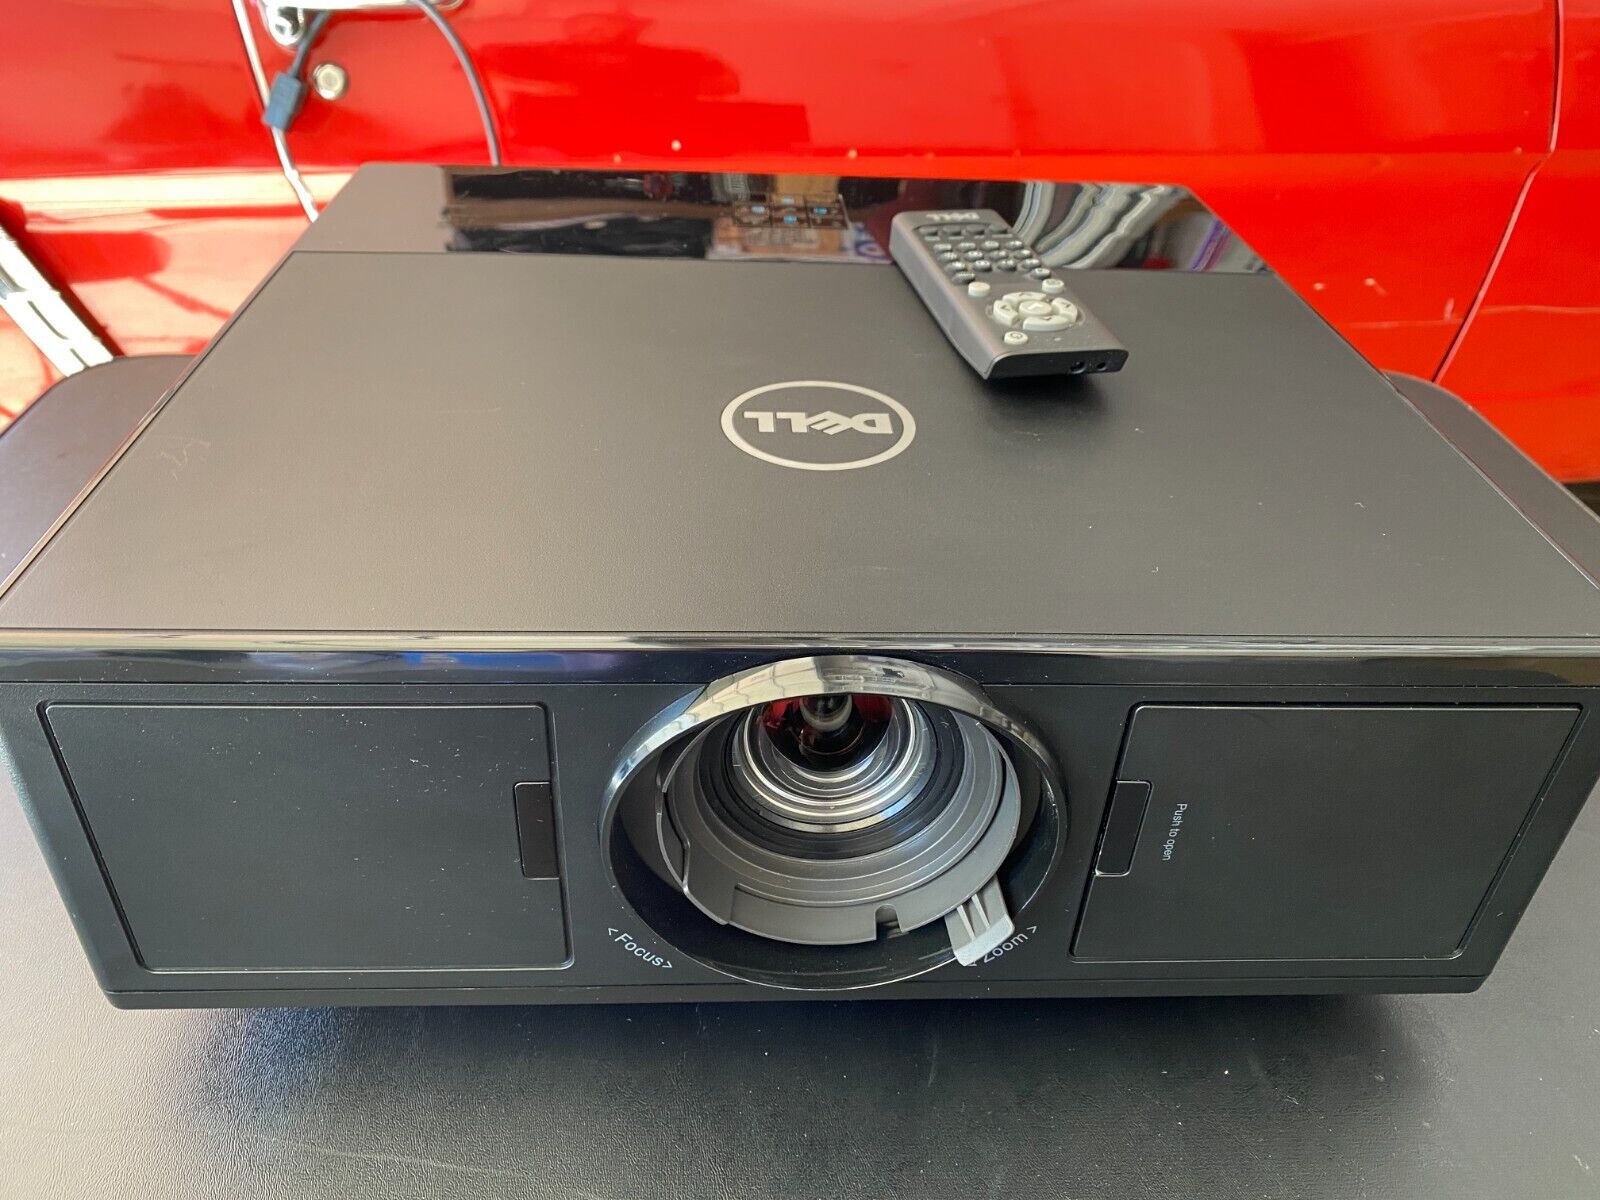 NEW Dell Advanced Projector 7760 FHD 1080p 5400 Lumens XXP7R **Price Reduced****